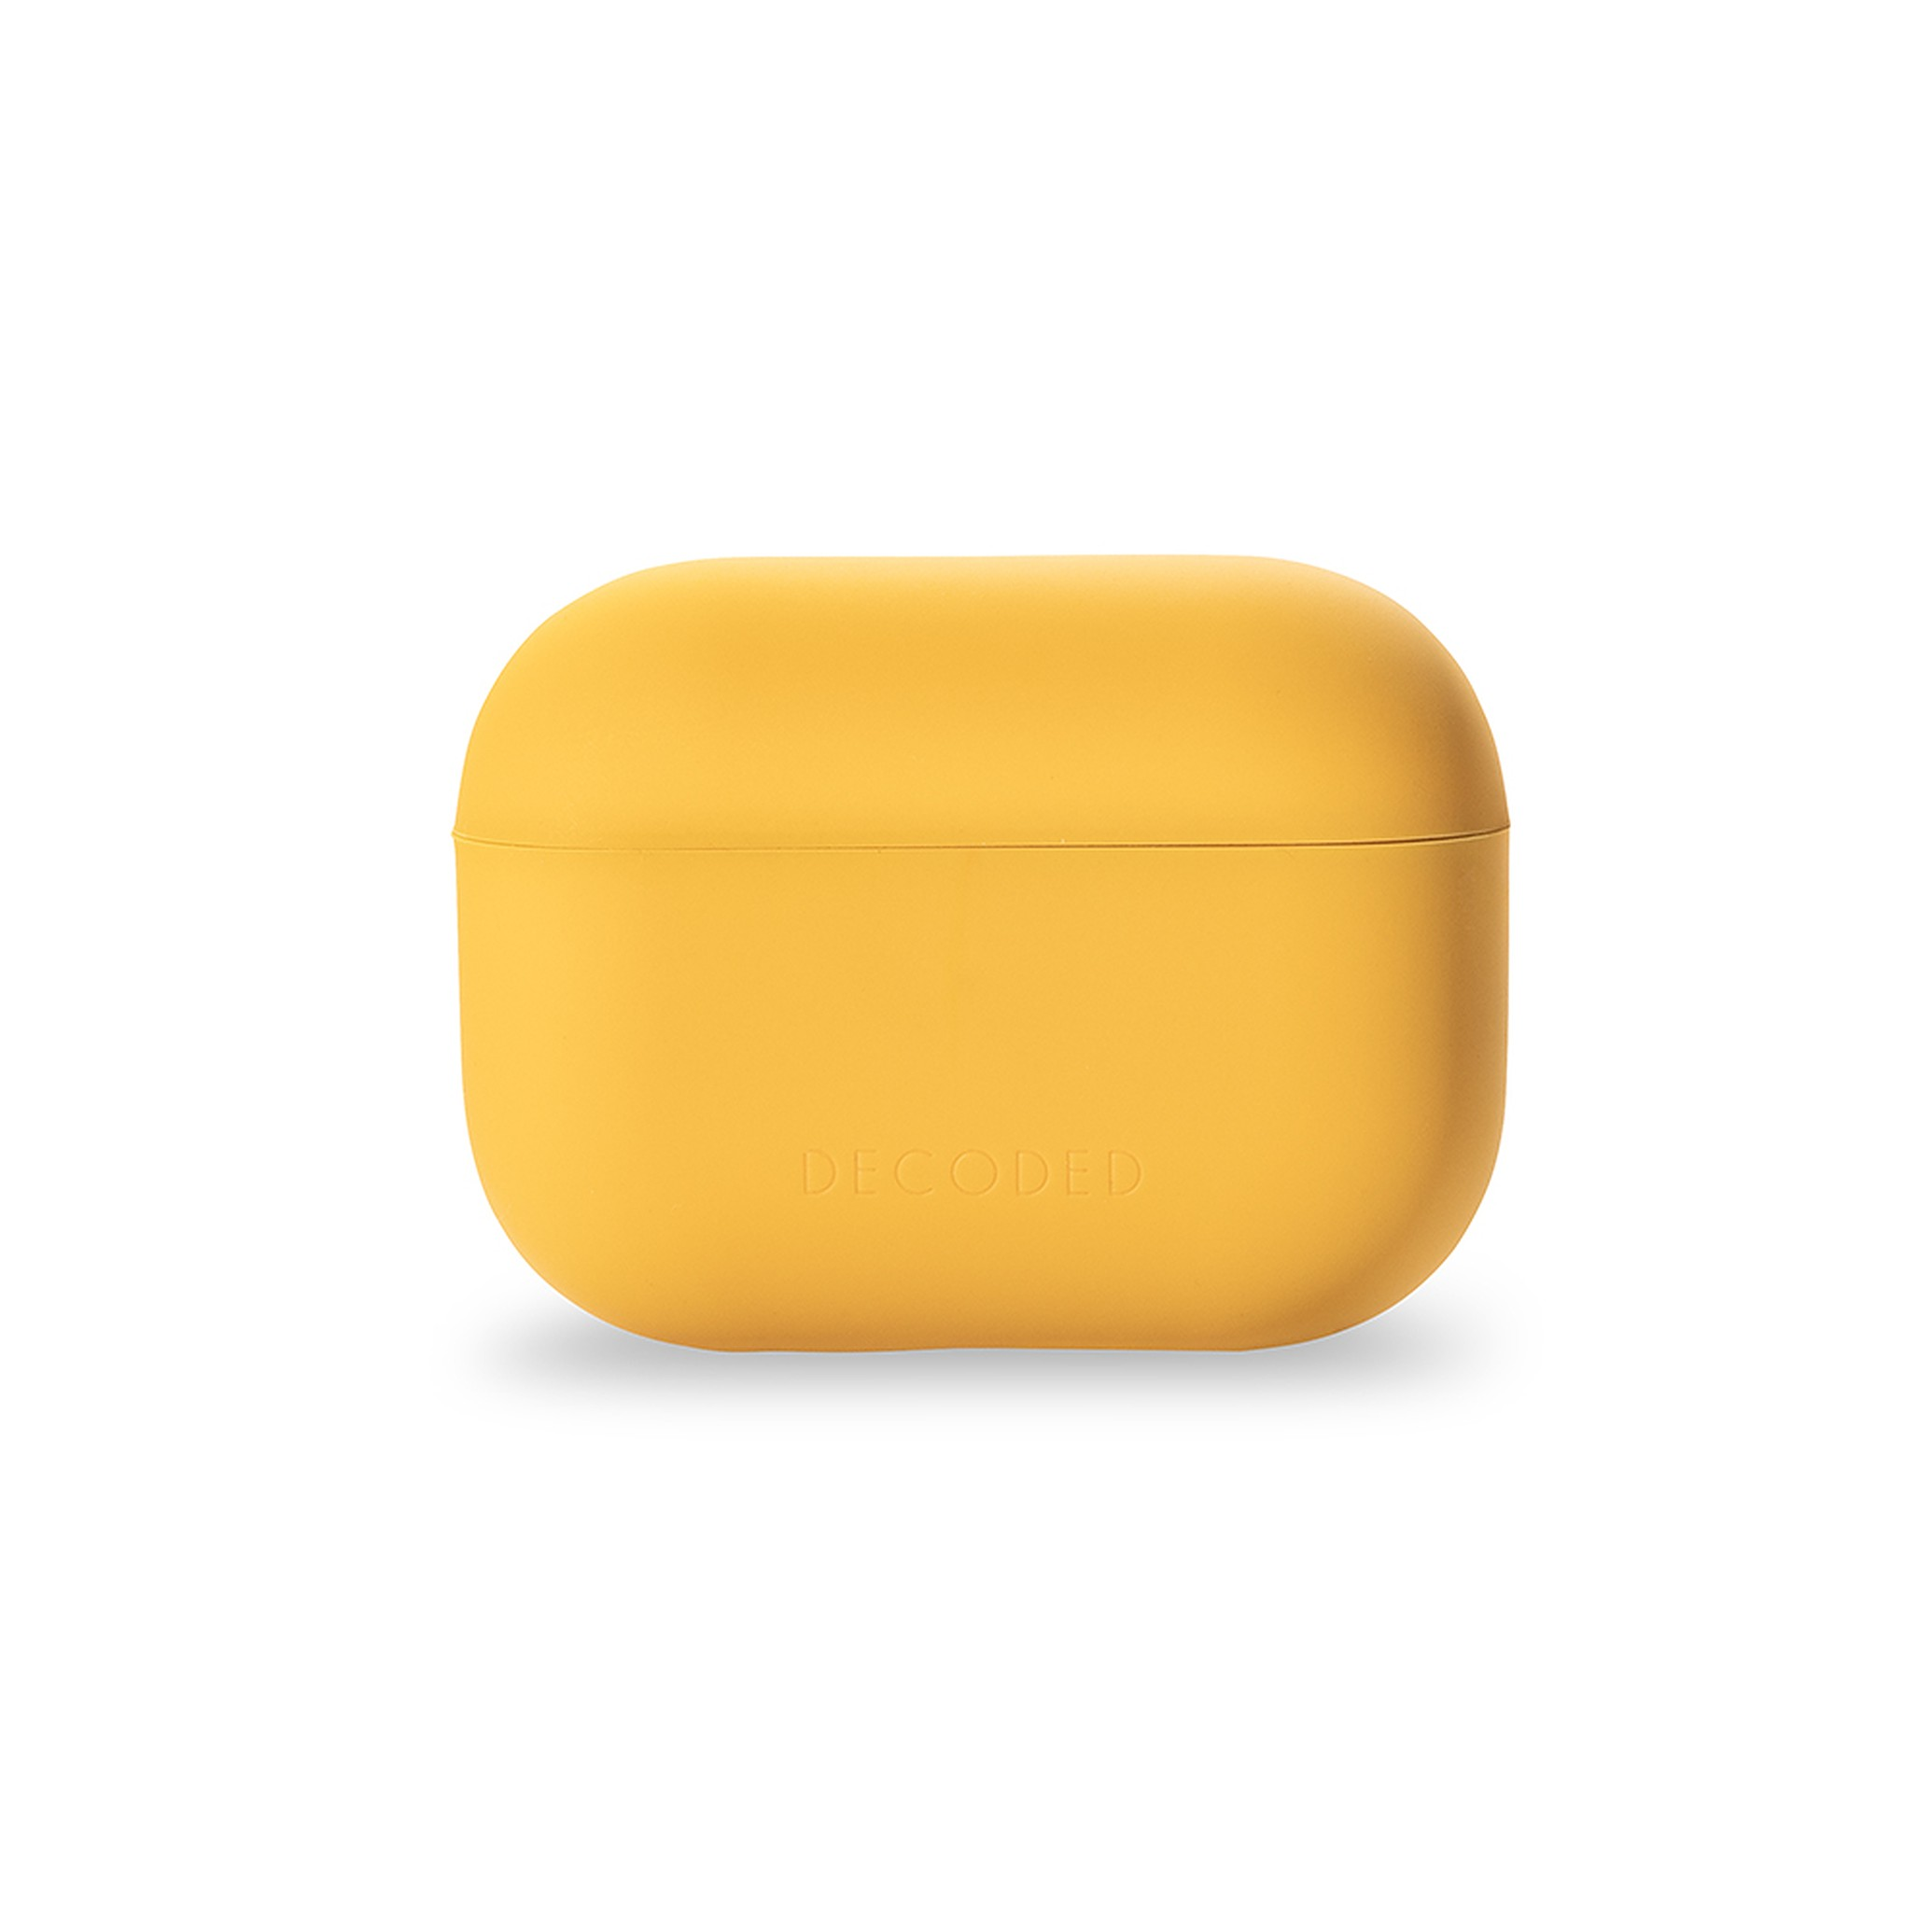 Airpods DECODED Cover, Sun 3, Aircase, Apple, Tuscan Full